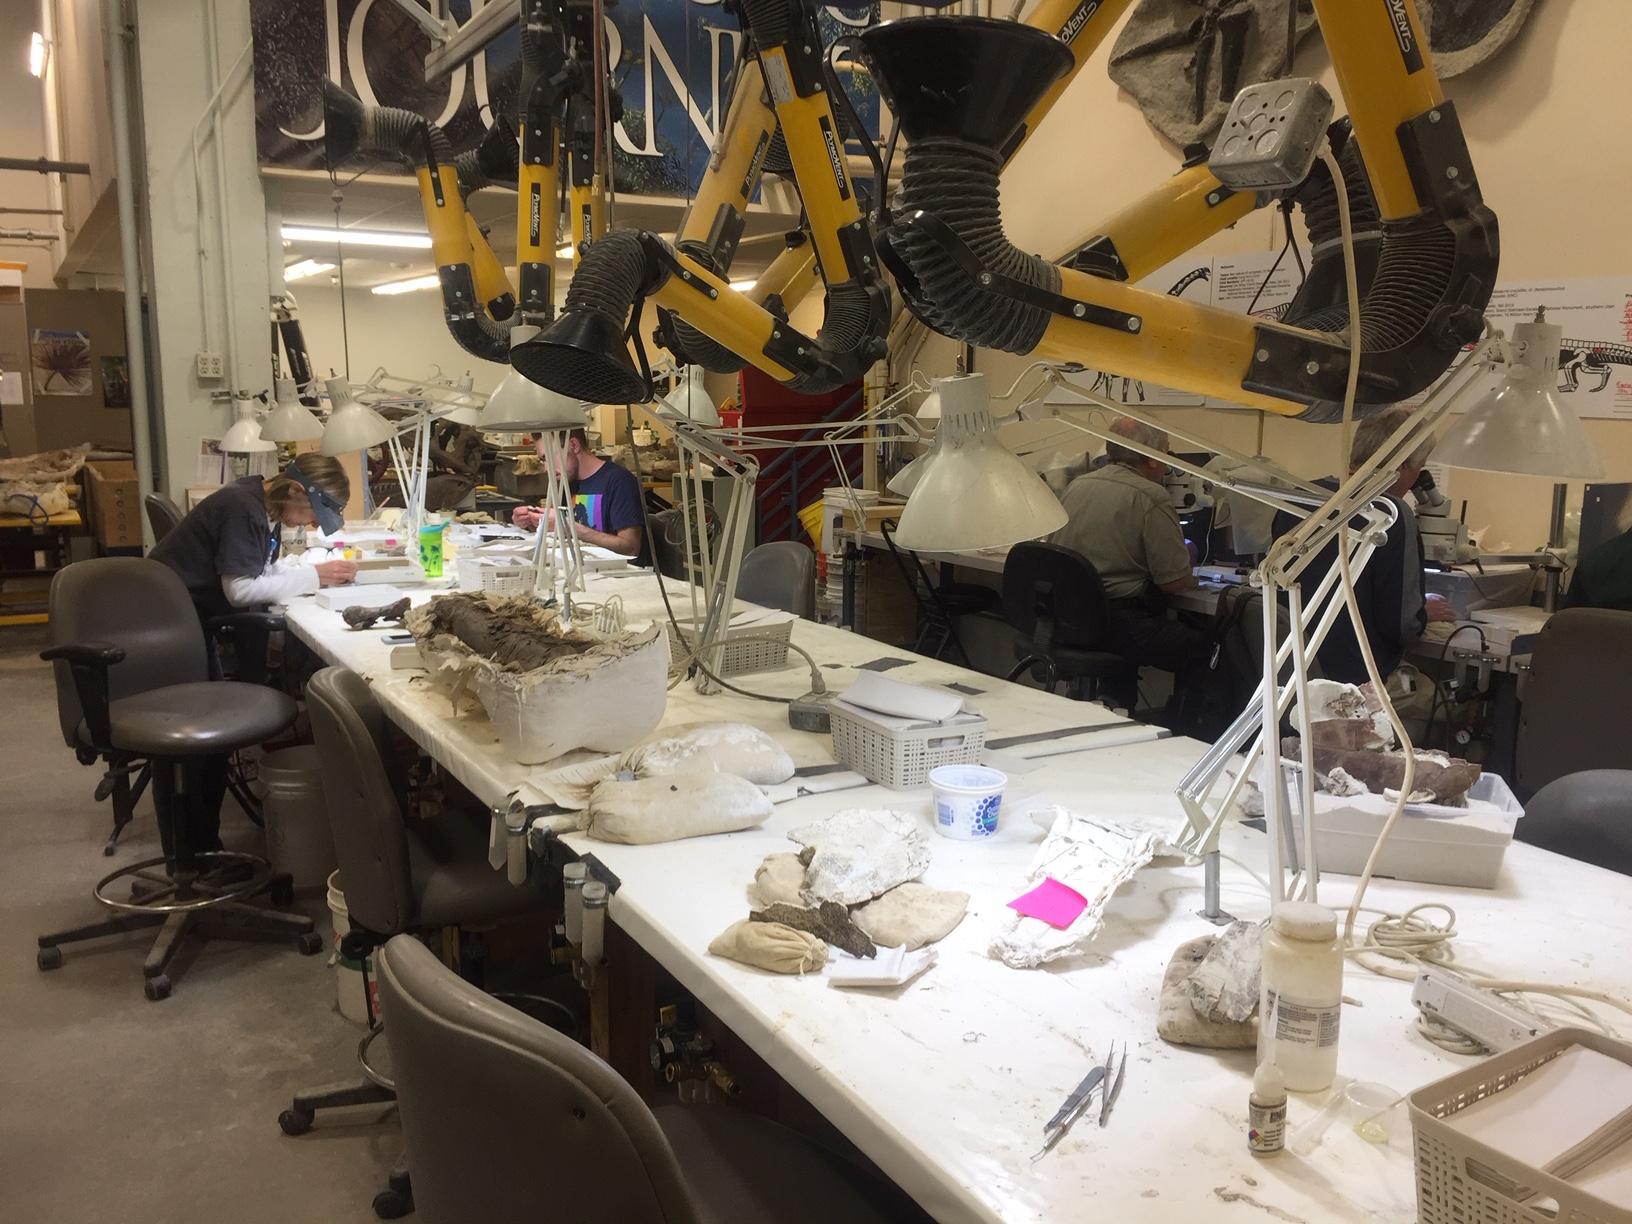 One of the fossil preparation labs at the Denver Museum of Nature and Science